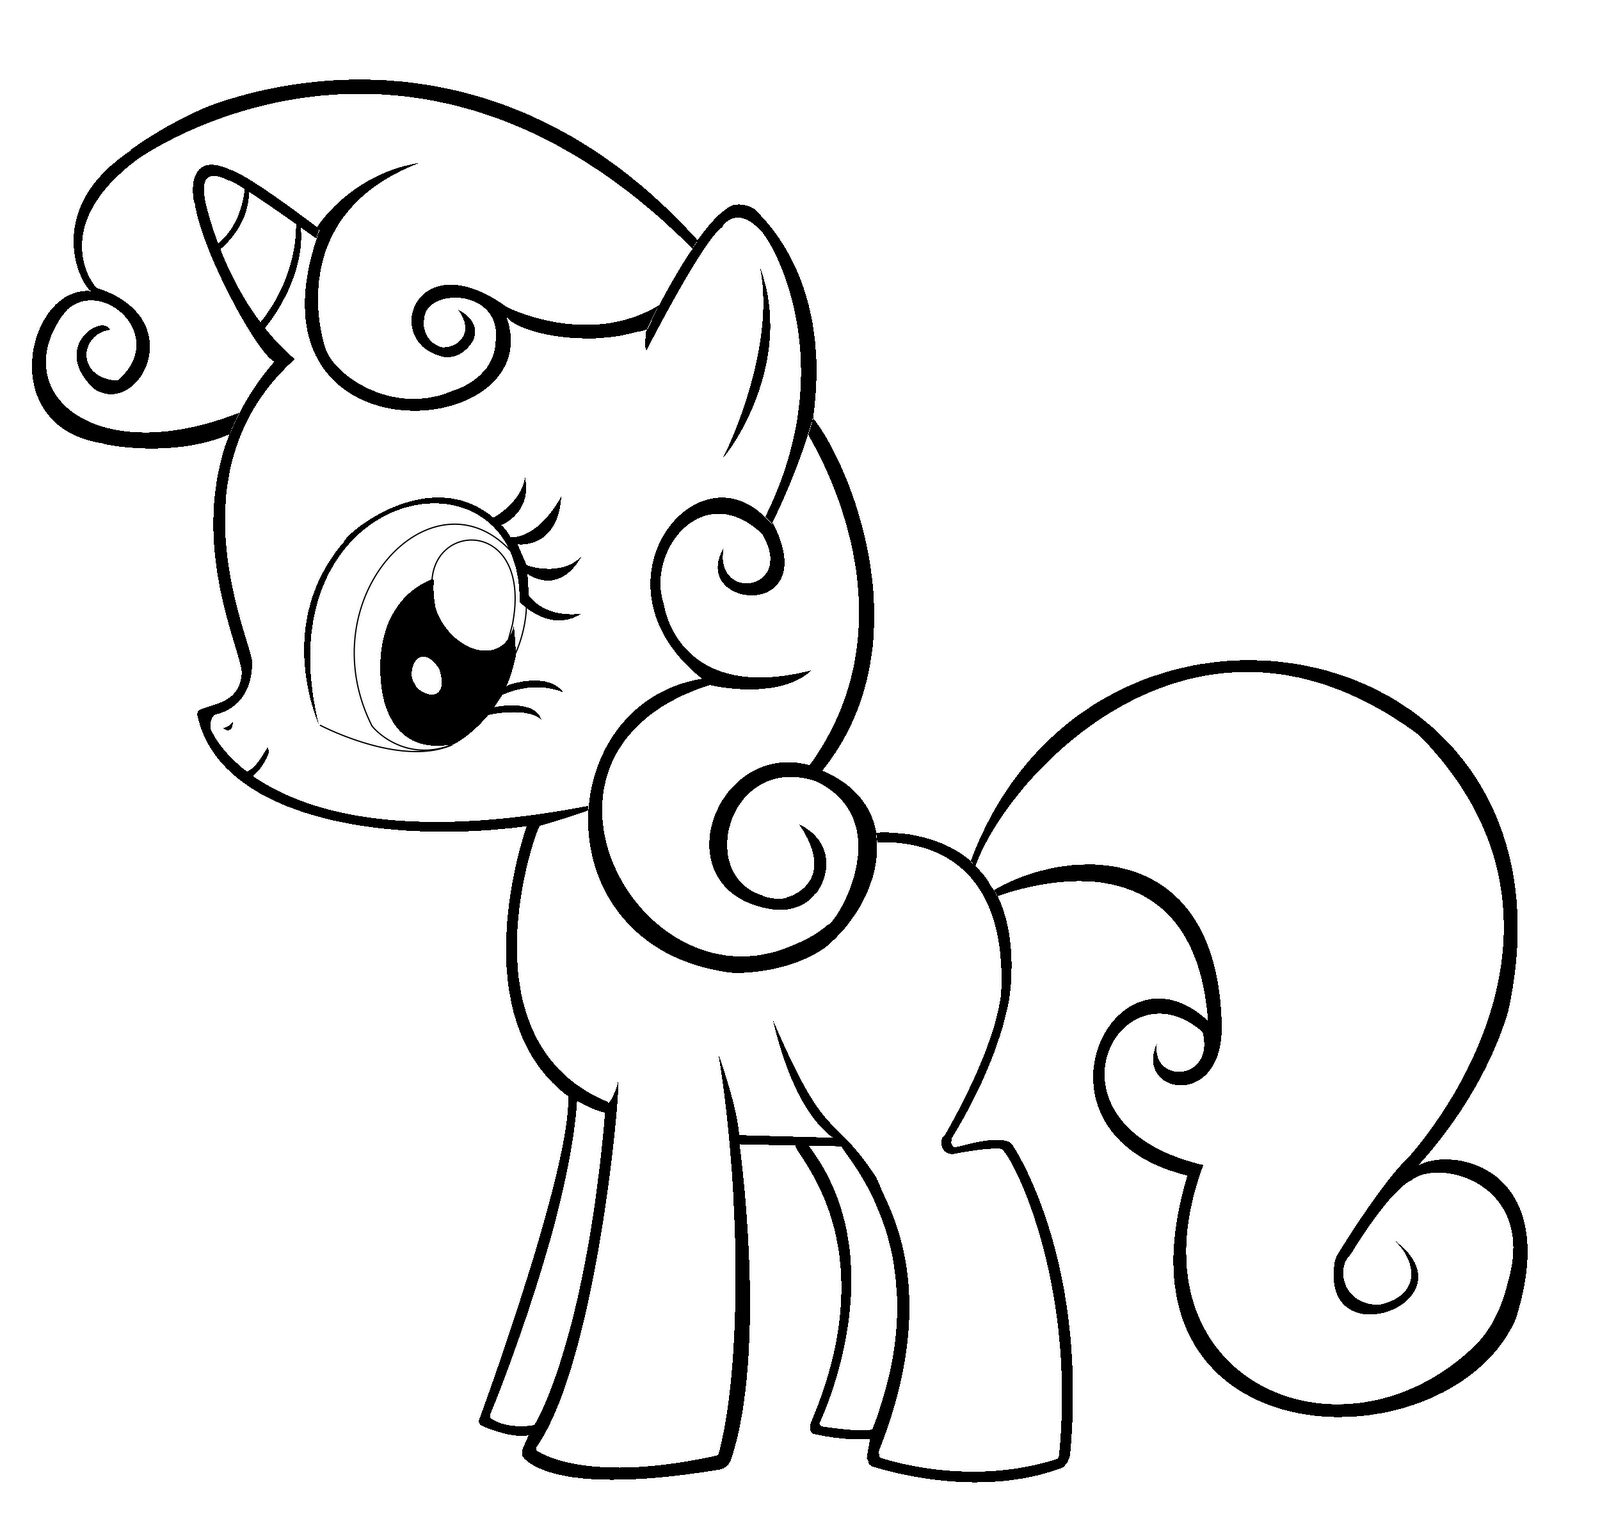 Free Printable My Little Pony Coloring Pages For Kids Effy Moom Free Coloring Picture wallpaper give a chance to color on the wall without getting in trouble! Fill the walls of your home or office with stress-relieving [effymoom.blogspot.com]